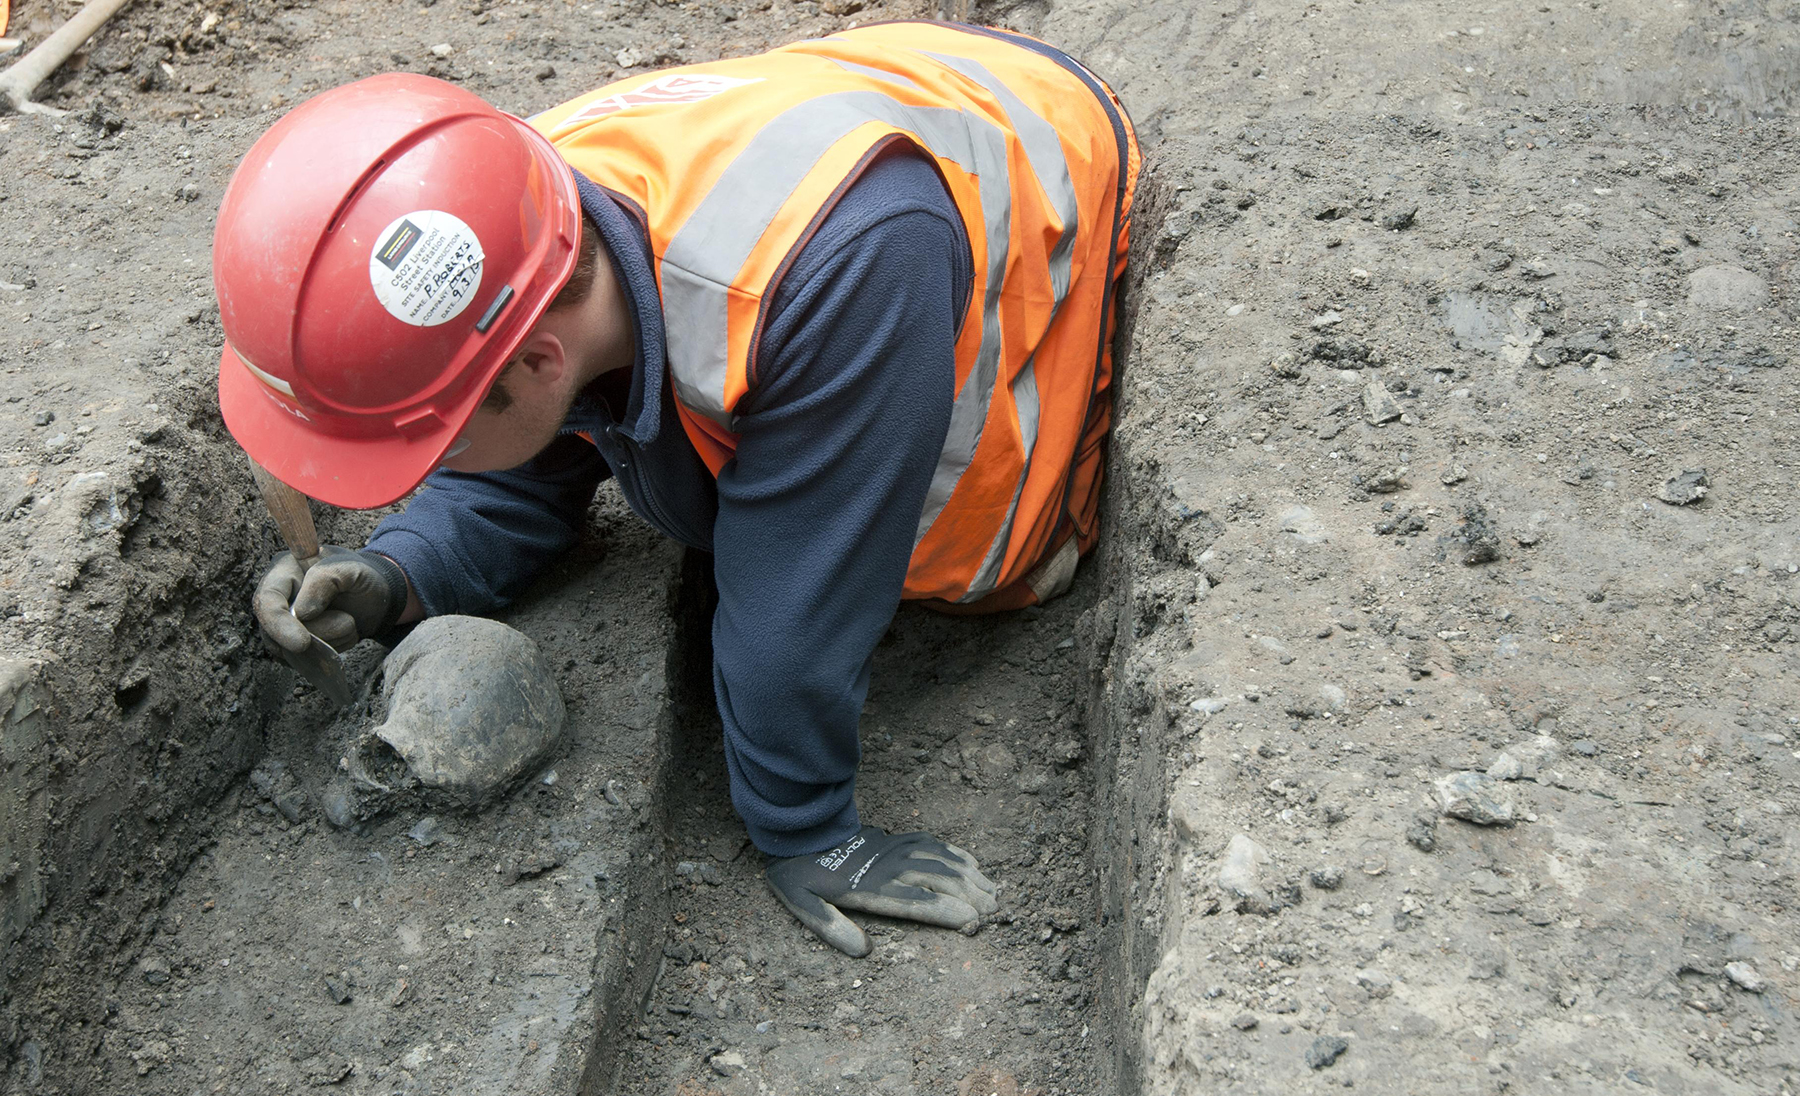 An archaeologist works to excavate a skull along the side of an ancient Roman road near Liverpool Street ticket hall. (Image courtesy of Transport for London)